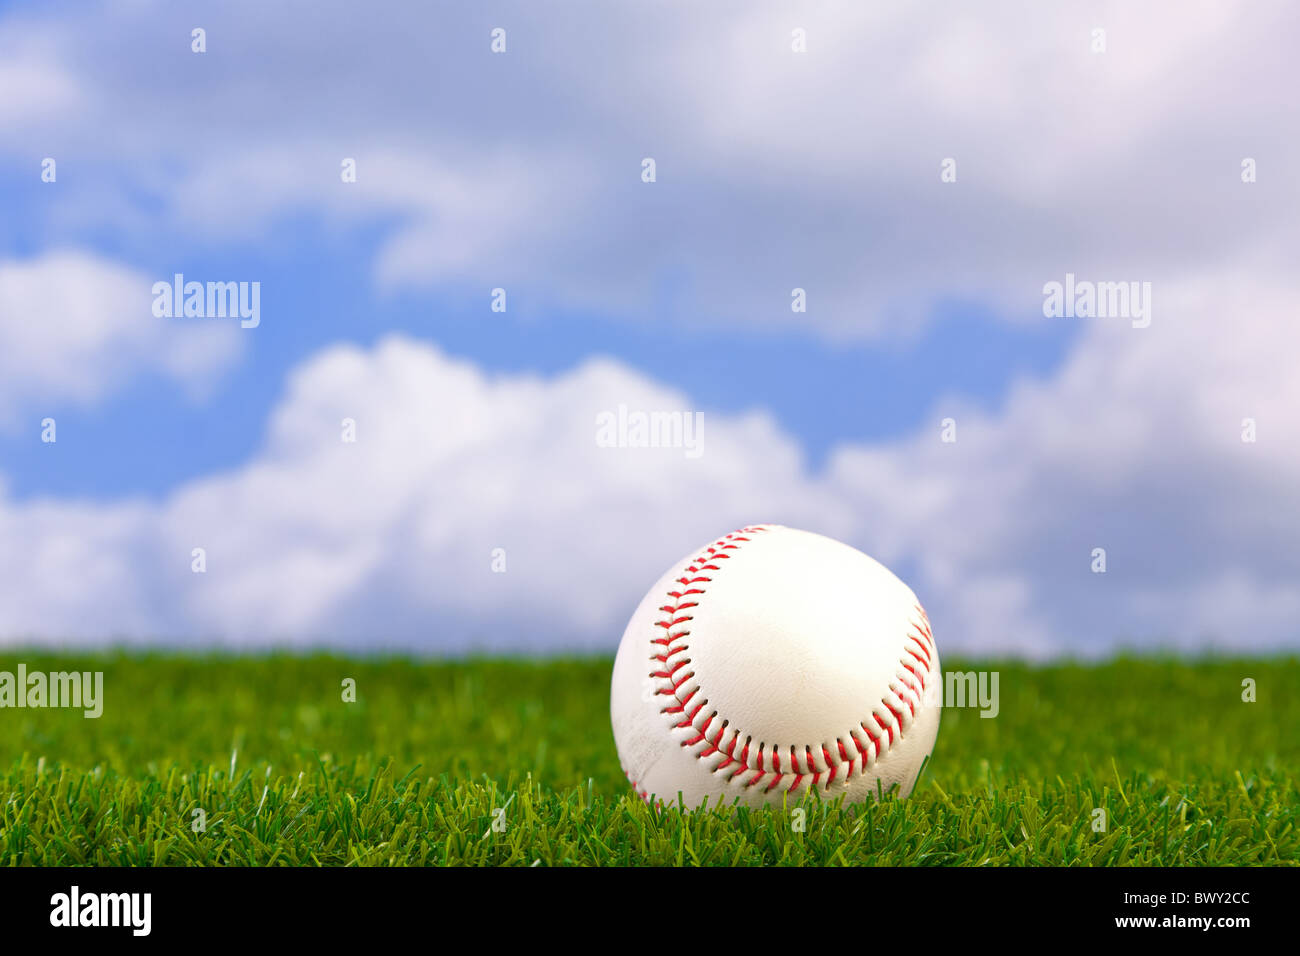 Photo of a baseball on grass with sky background. Stock Photo